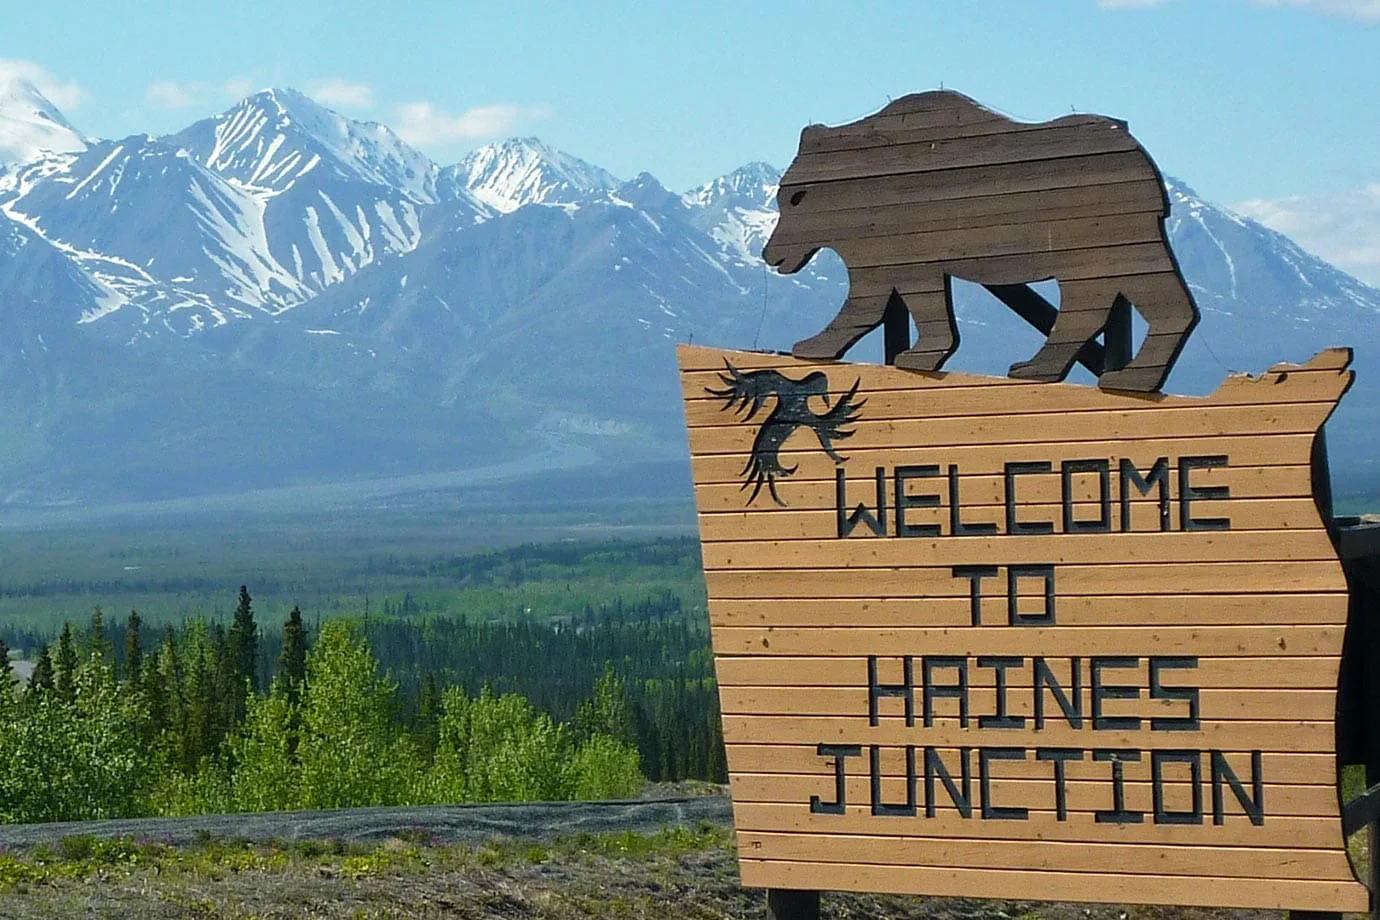 Welcome to Haines Junction